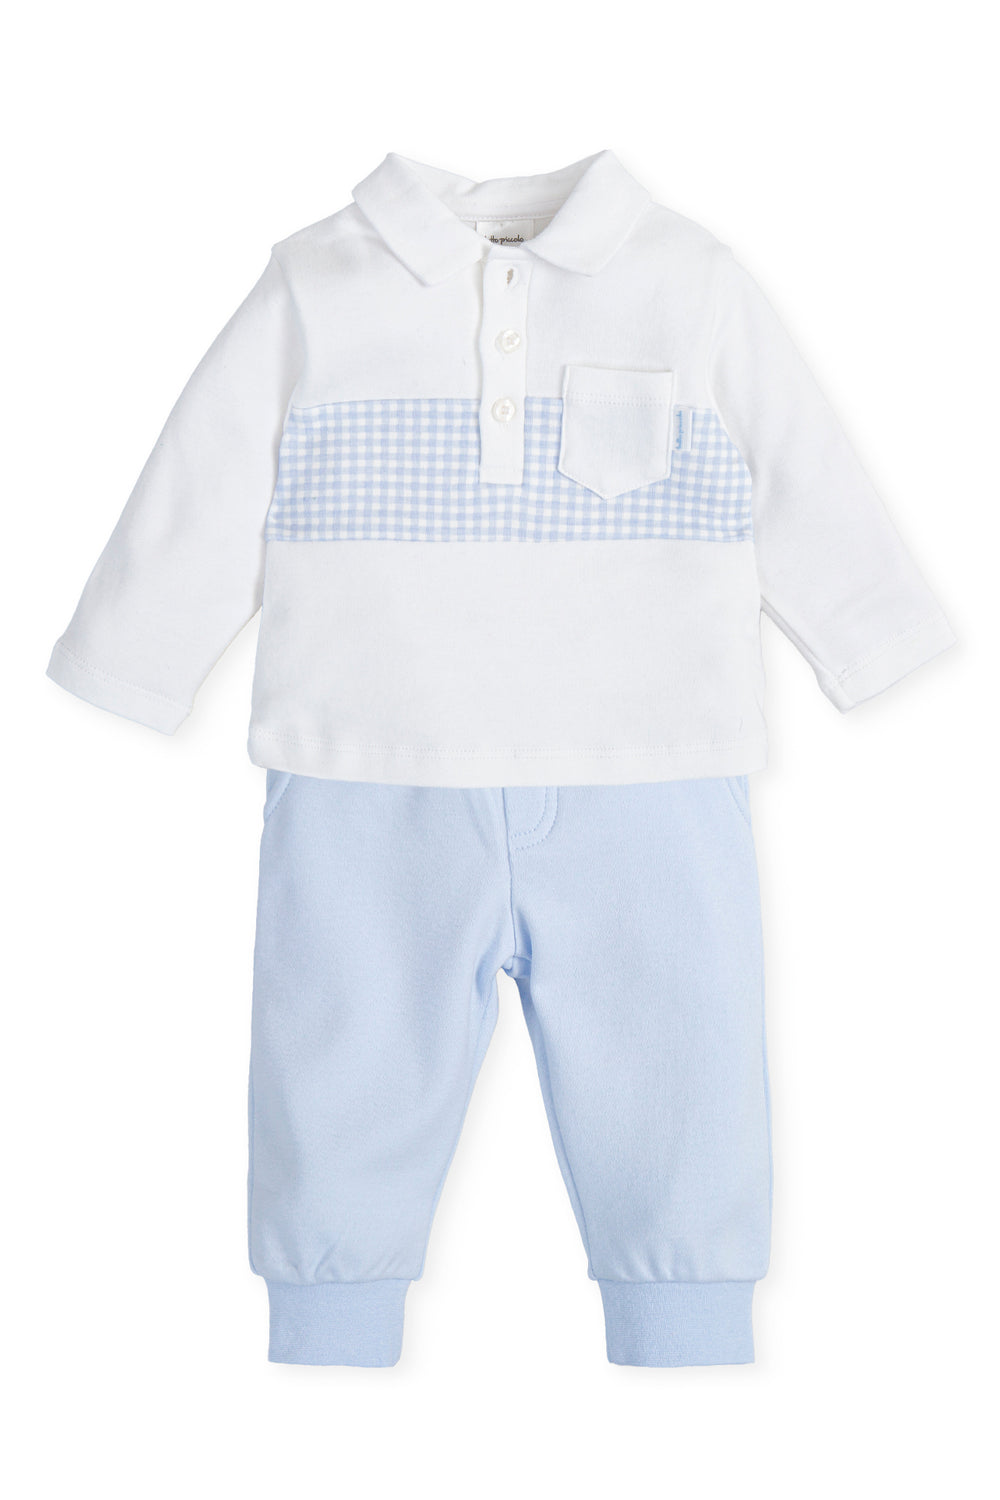 Tutto Piccolo "Jacob" White & Blue Gingham Top & Trousers | iphoneandroidapplications